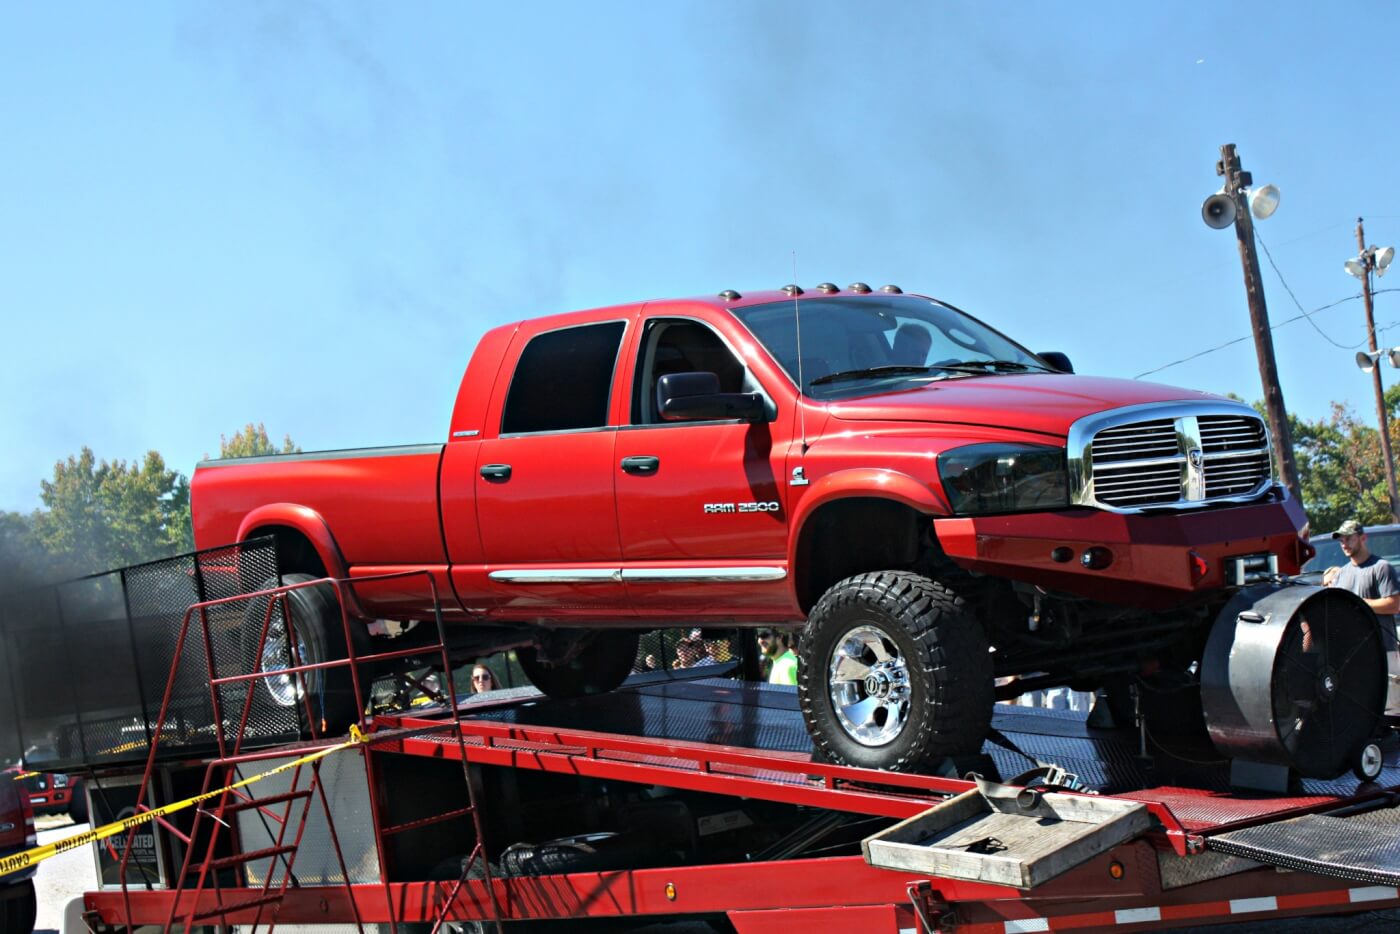 The portable dyno stayed busy throughout the day with plenty of high horsepower trucks strutting their stuff on the rollers. This big mega cab put down some of the biggest numbers of the day at 600+ rear wheel horsepower.